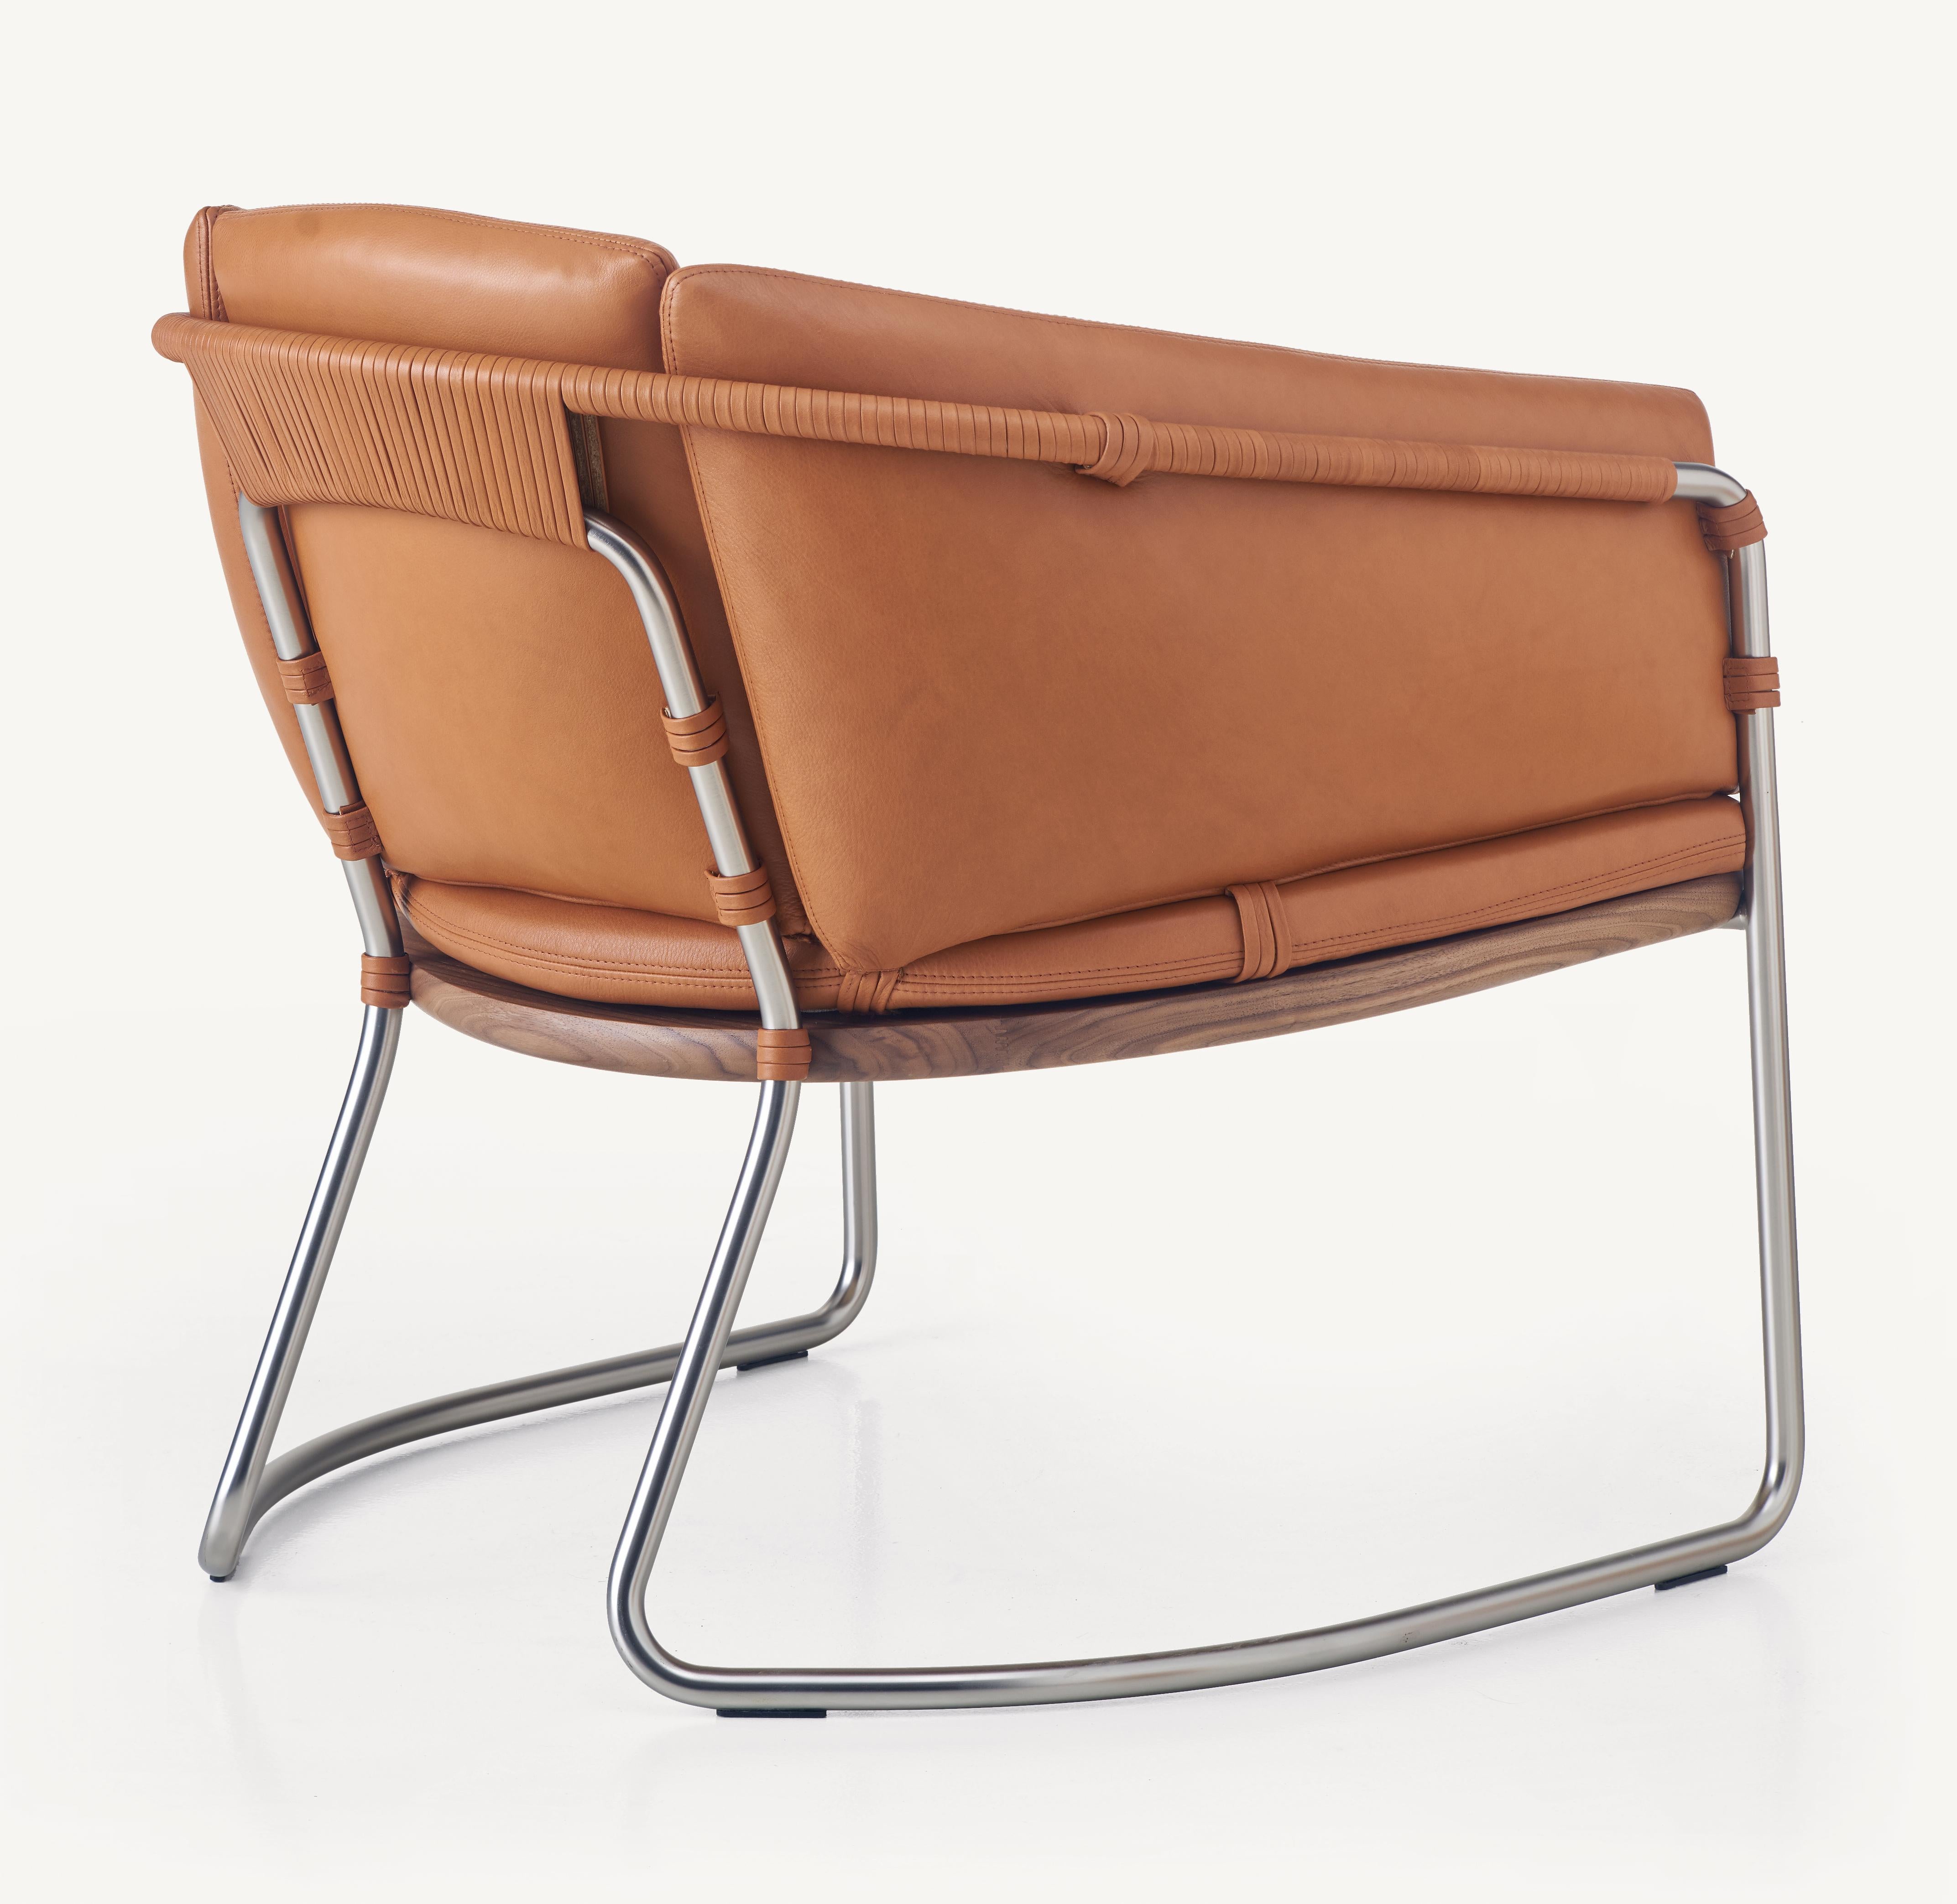 For Sale: Brown (Elegant 43807 British Tan) Geometric Lounge Chair in Walnut, Satin Nickel and Leather by Craig Bassam 2